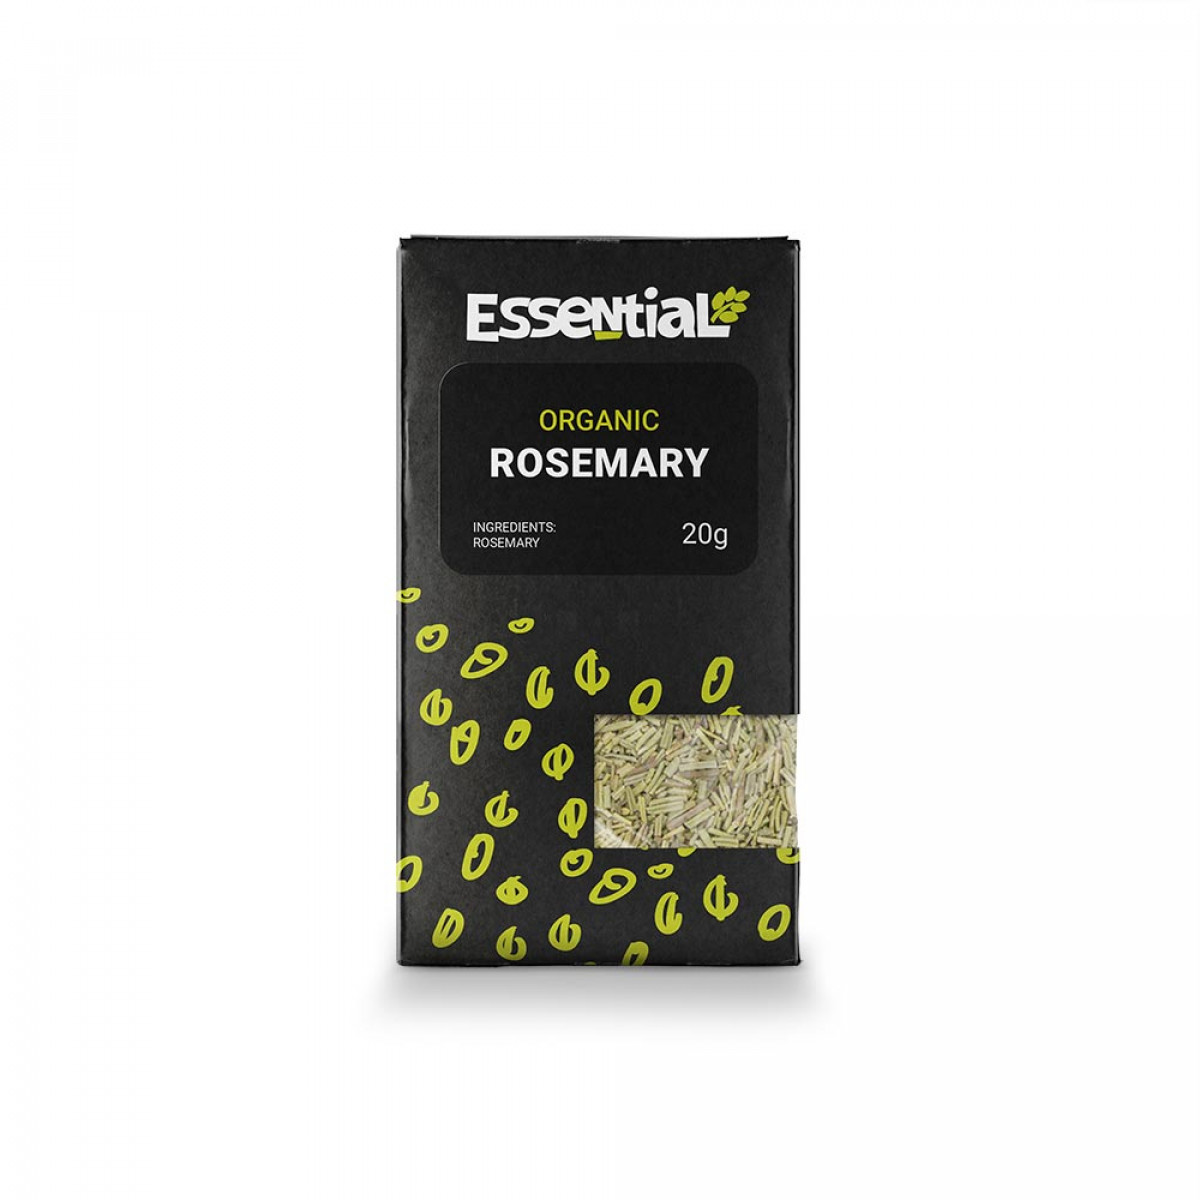 Product picture for Rosemary